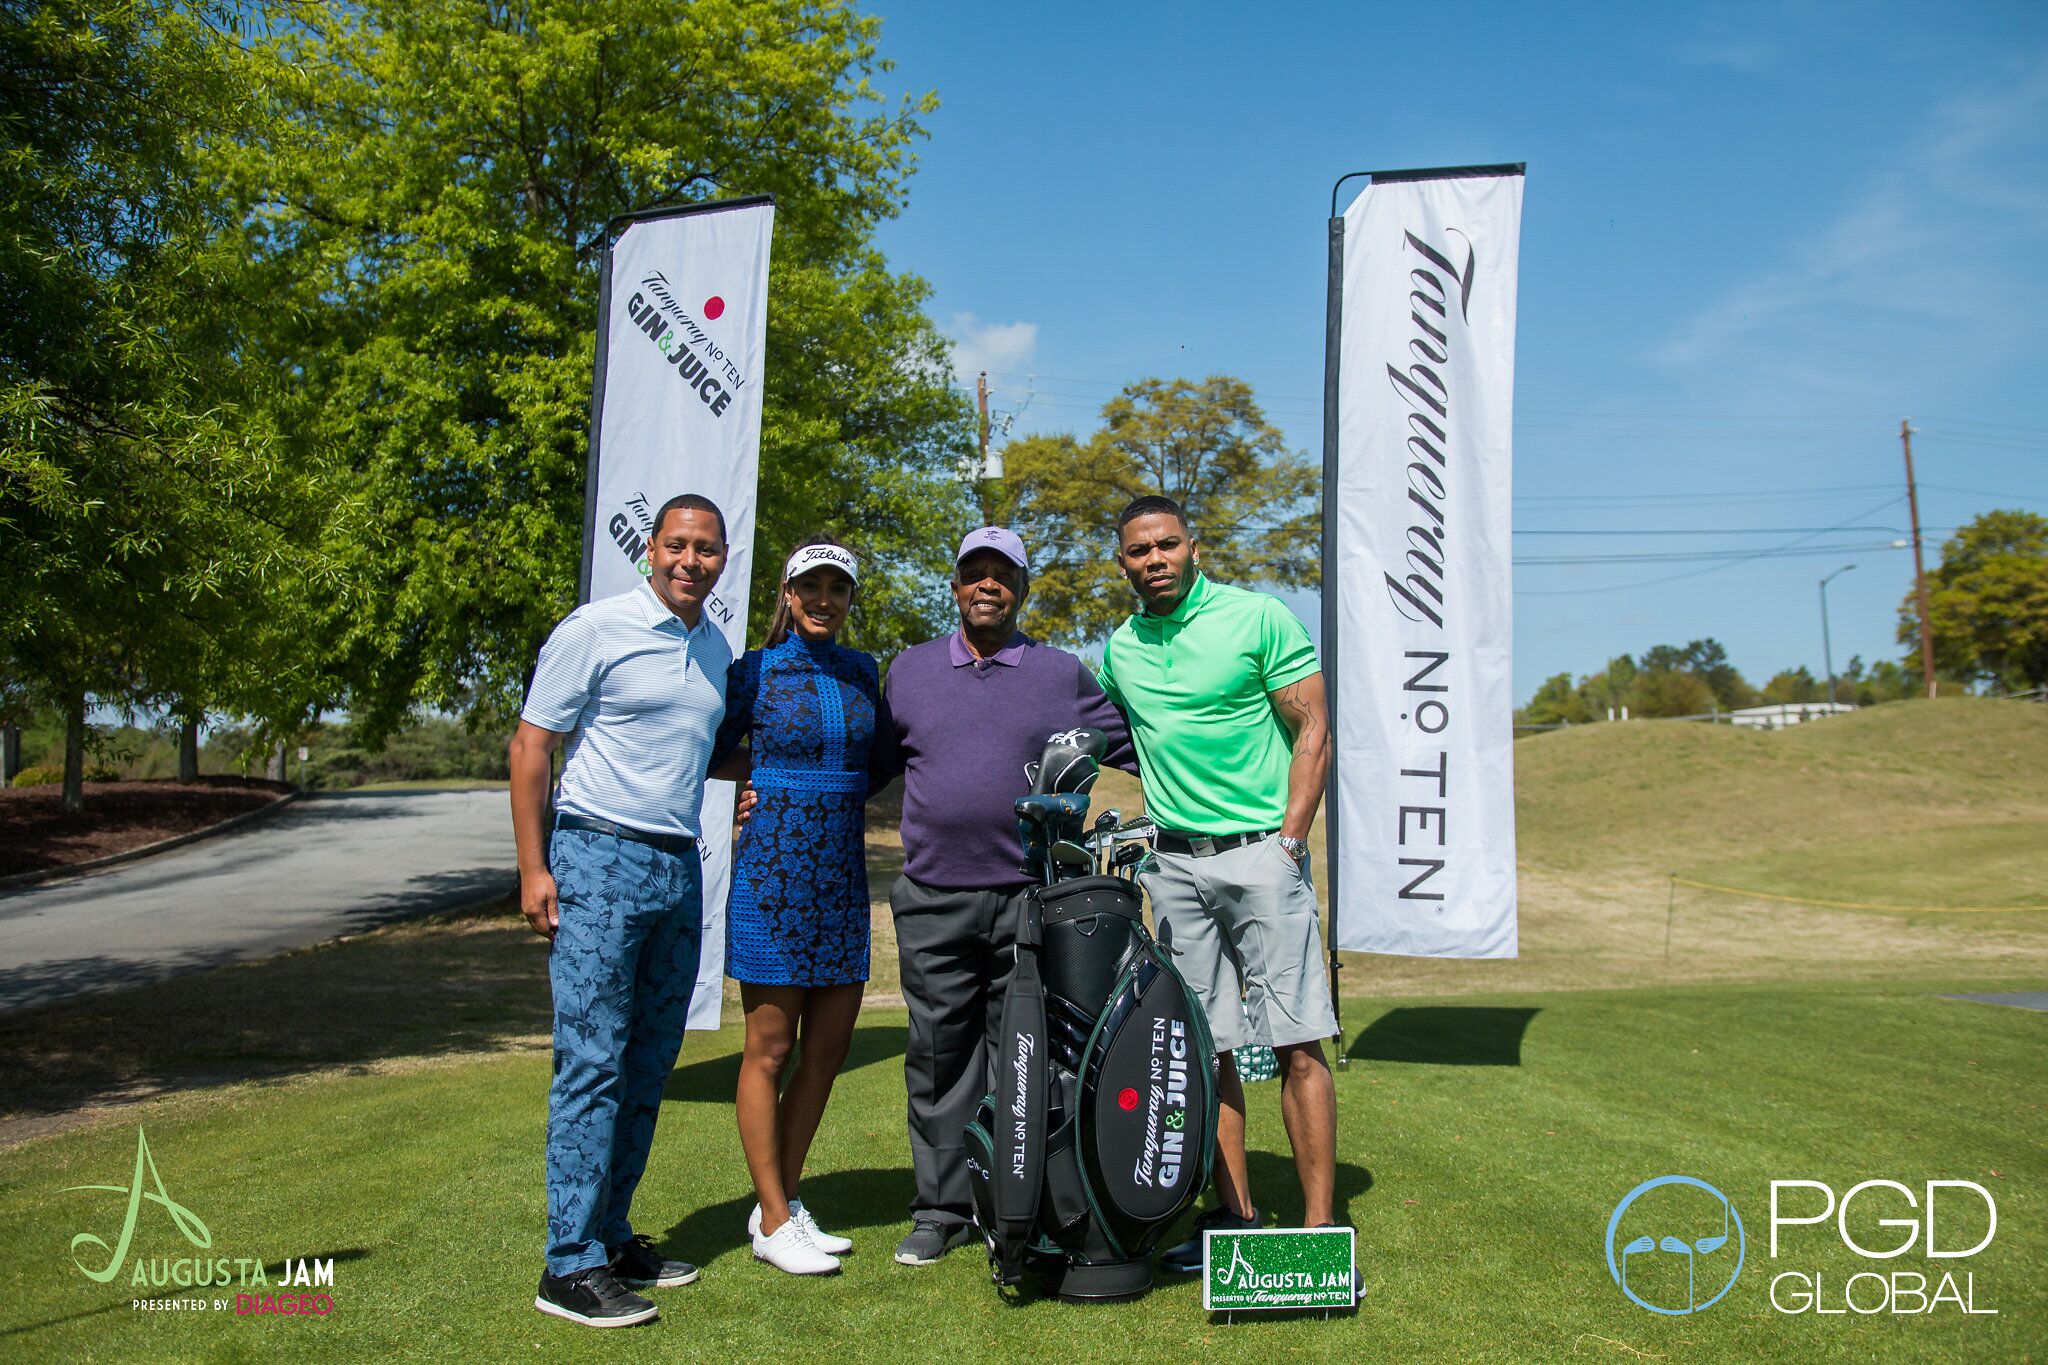 (L-R) Keenan Towns with Diageo, Seema Sadekar, Lee Elder and Nelly pose during Augusta Jam Community Event presented by Tanqueray No. TEN